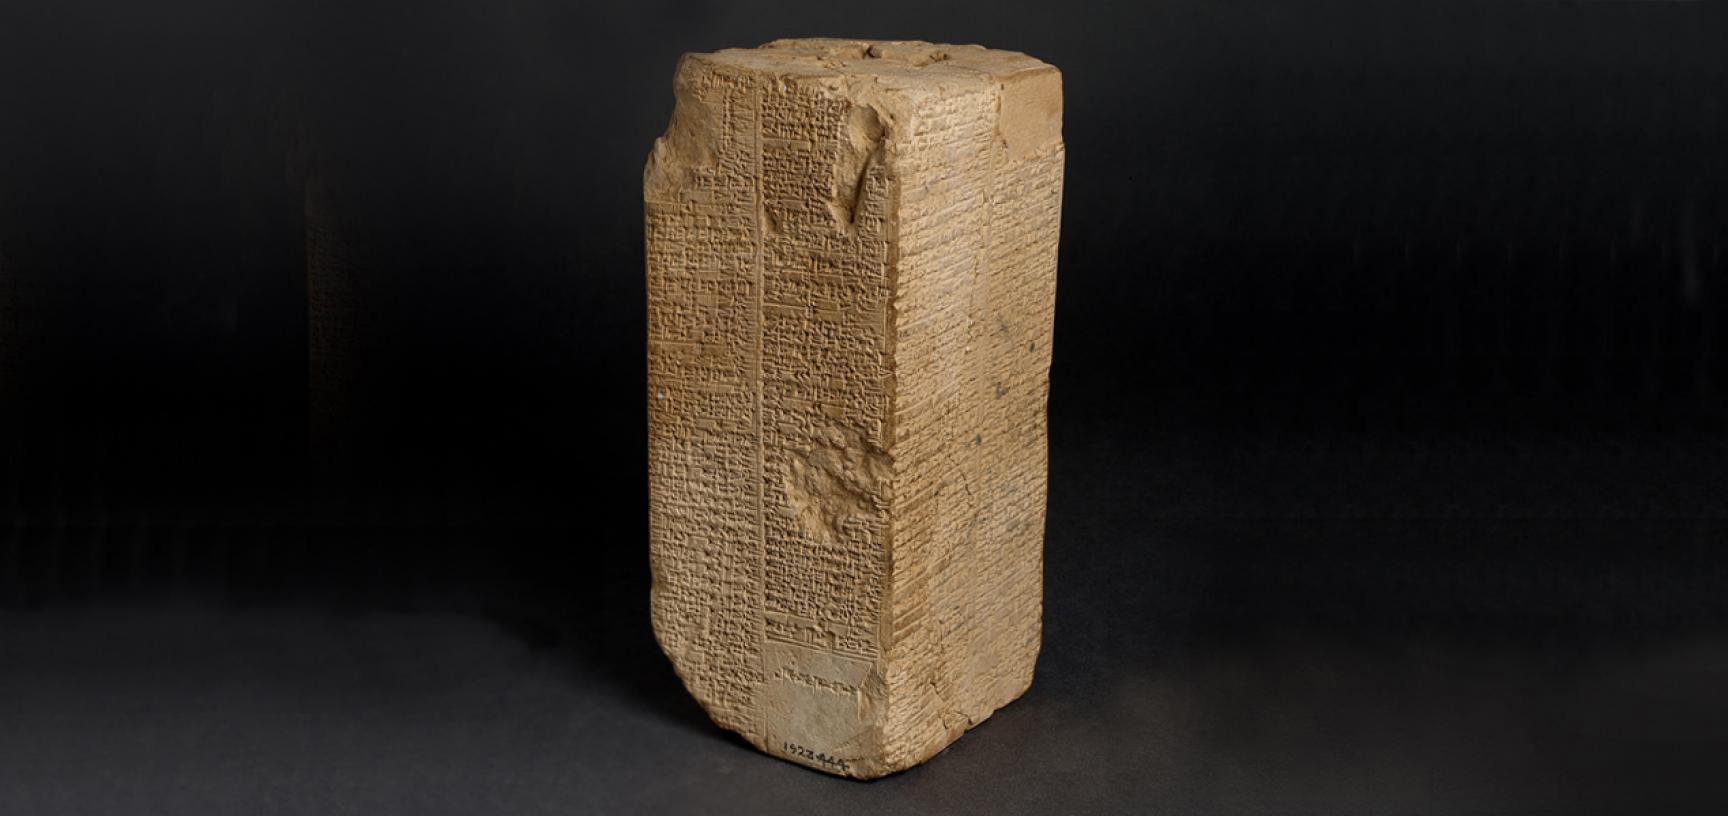 SUMERIAN KING LIST from the Ashmolean collections